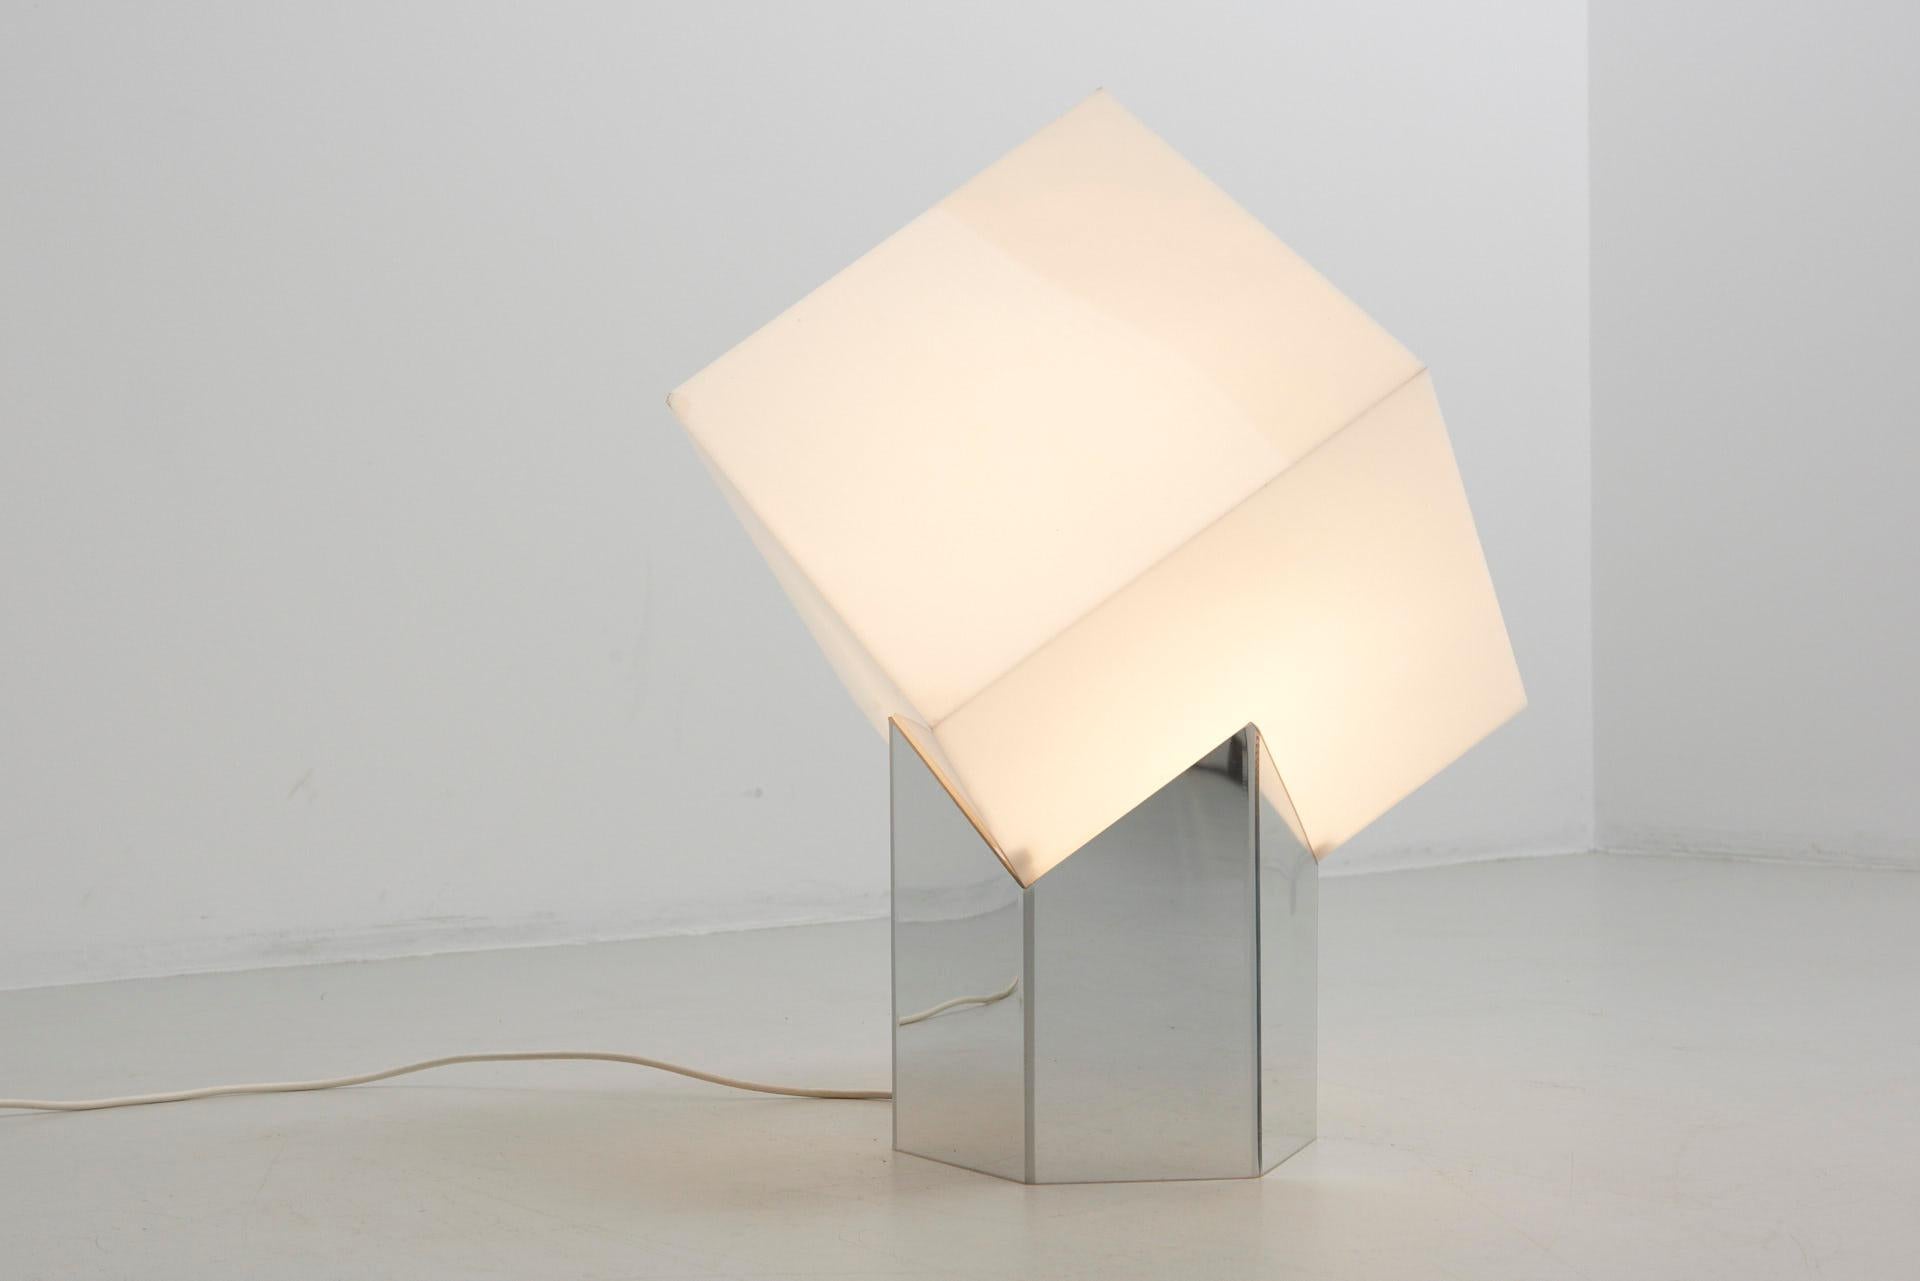 A light objects designed by Dutch designer Paul Driessen in 1974. The mirrored Perspex base holds a ‘floating’ opaline Perspex cube which gives a nice ambient light. The design dates from the same year the first cube-houses by Piet Blom were built,